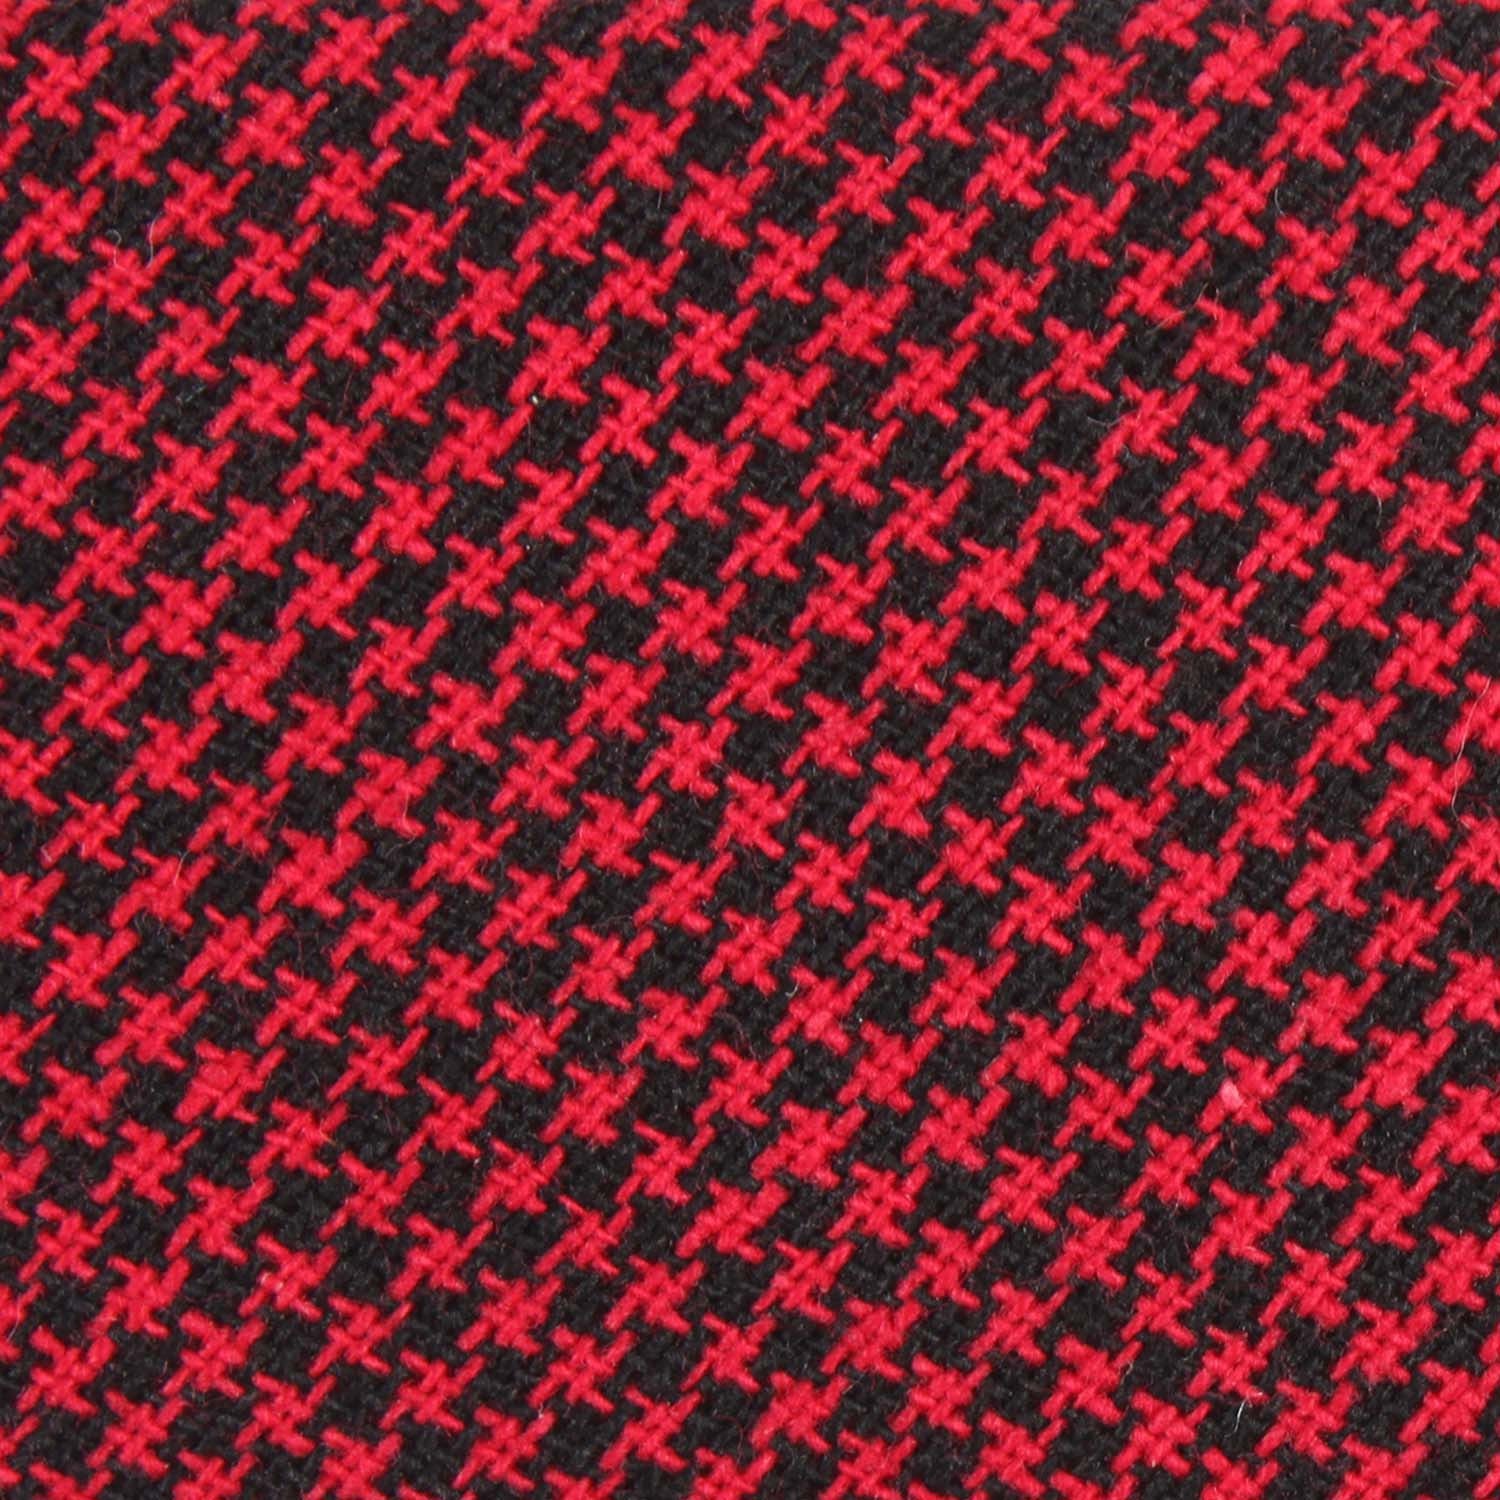 Red & Black Houndstooth Cotton Fabric Self Tie Bow Tie C165